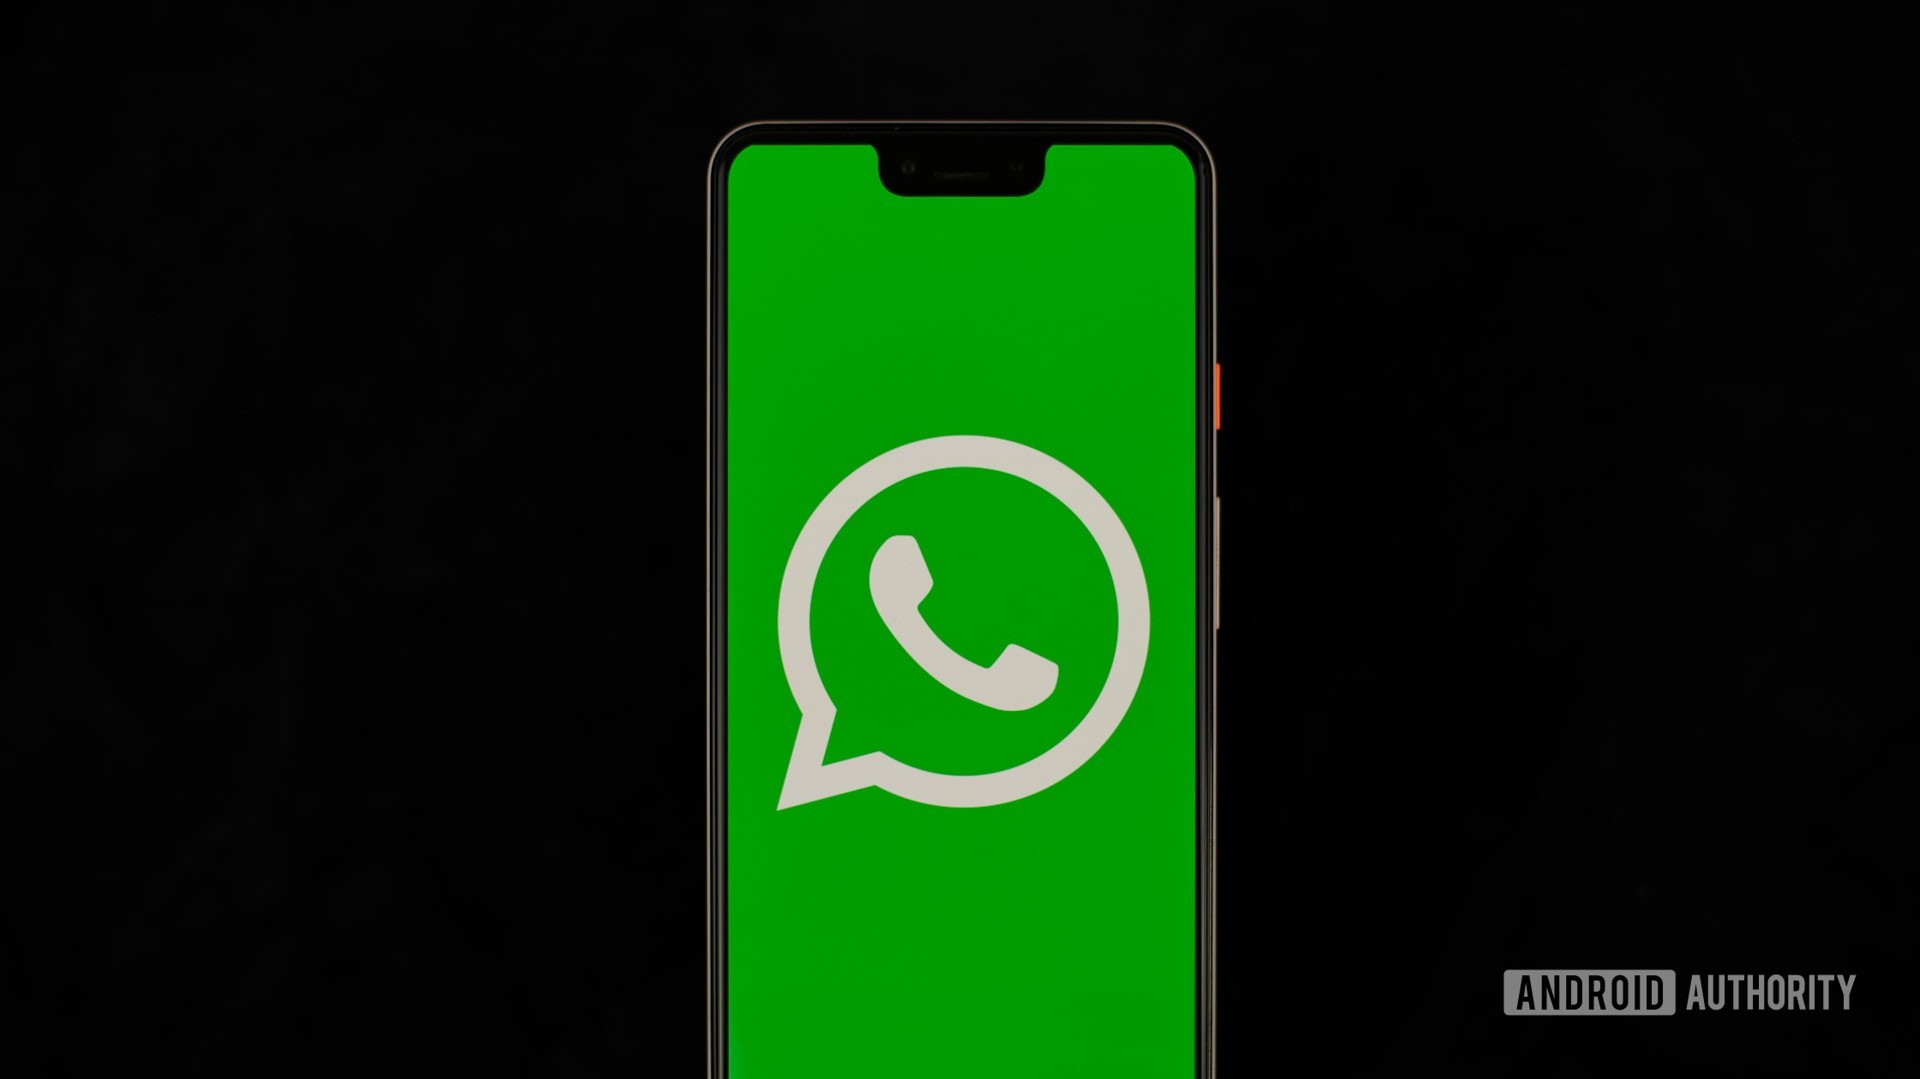 WhatsApp by Facebook stock photo 10